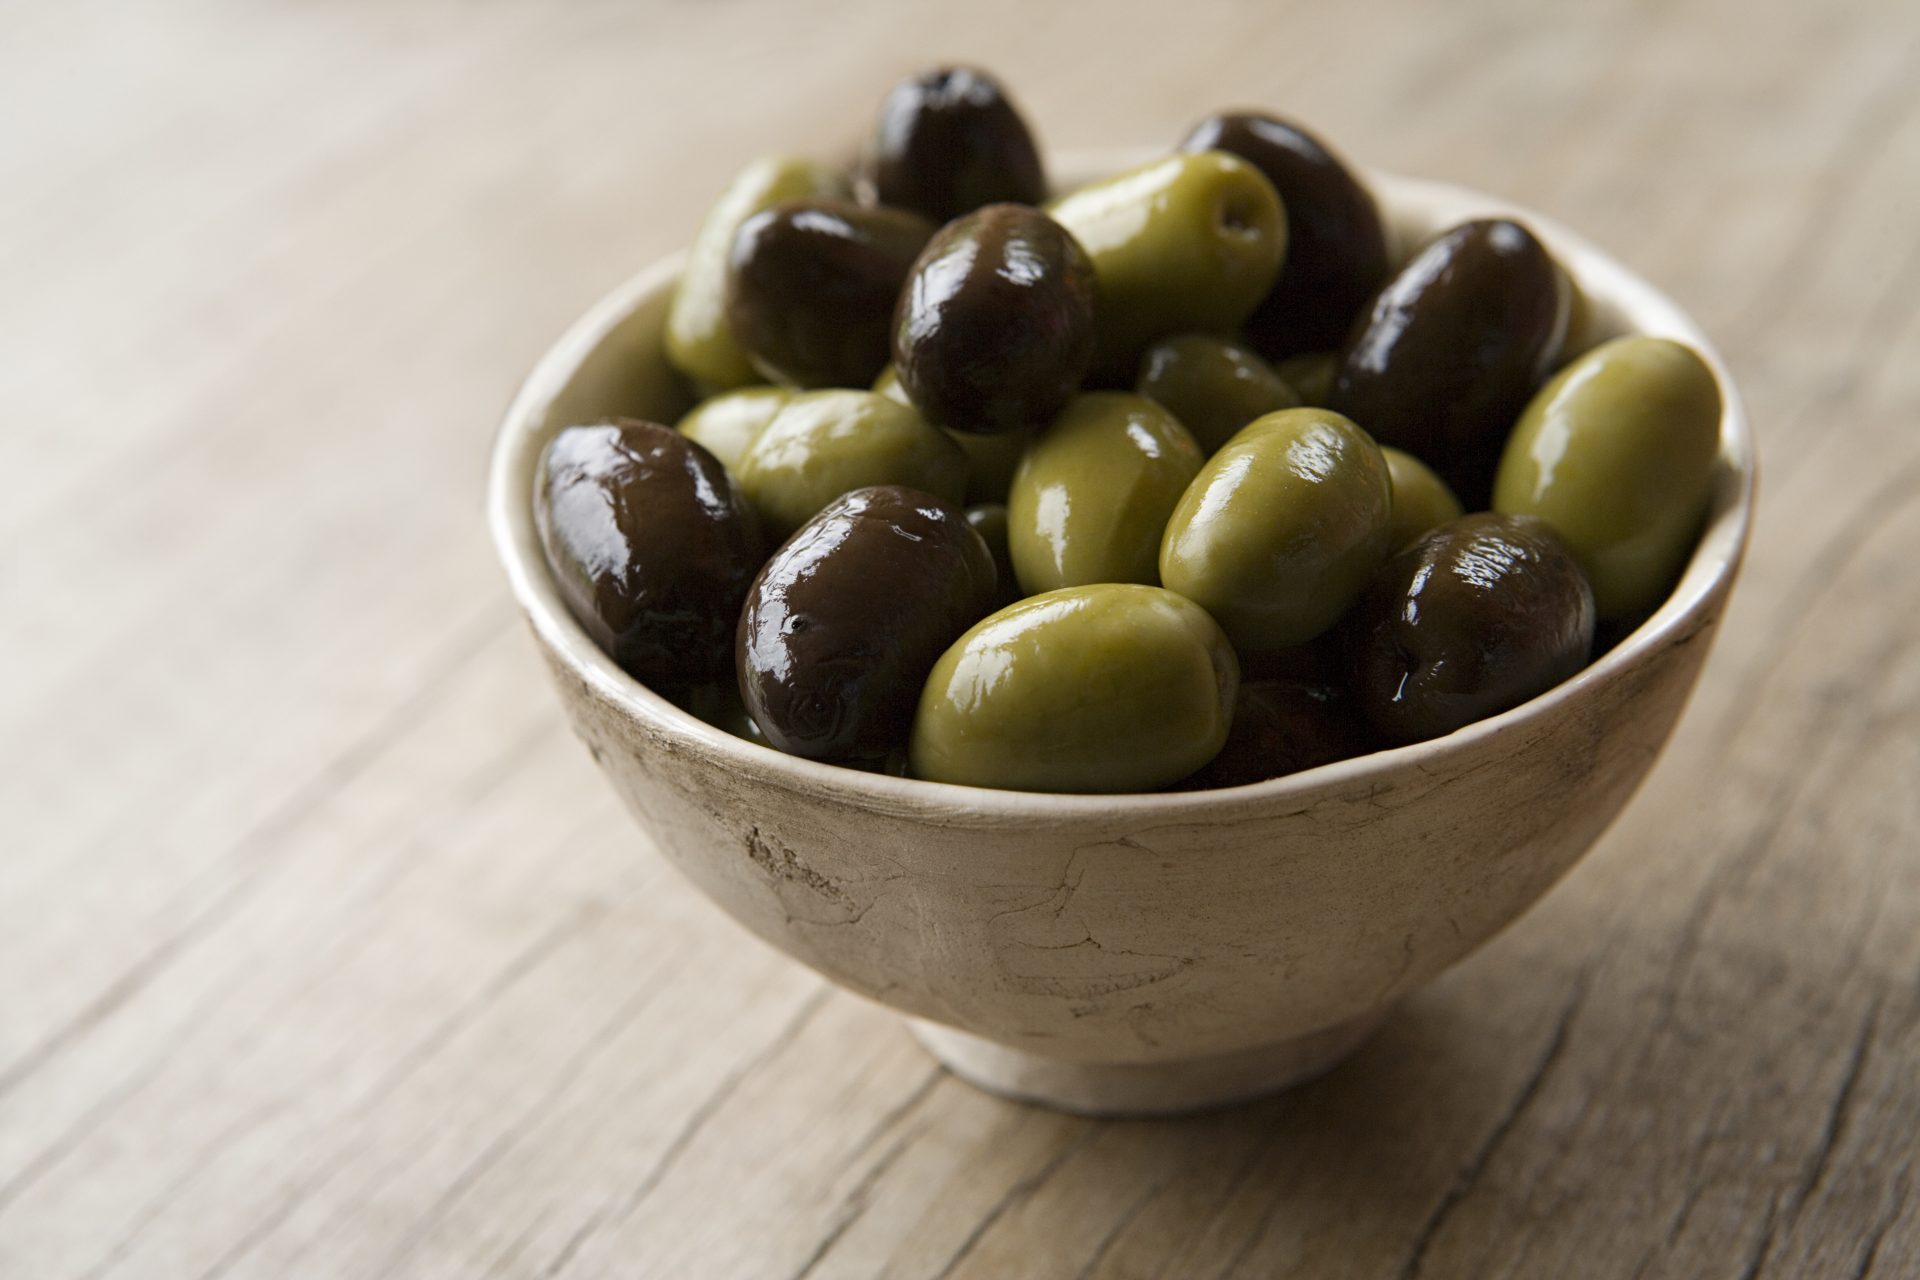 <p>Olives are one of the oldest fermented foods in the Mediterranean area. While some traditionally cured olives are available, many are often pasteurized too. That means they won't all carry the same probiotic punch as seen with other fermented foods. However, they have still been linked to numerous health benefits.</p>